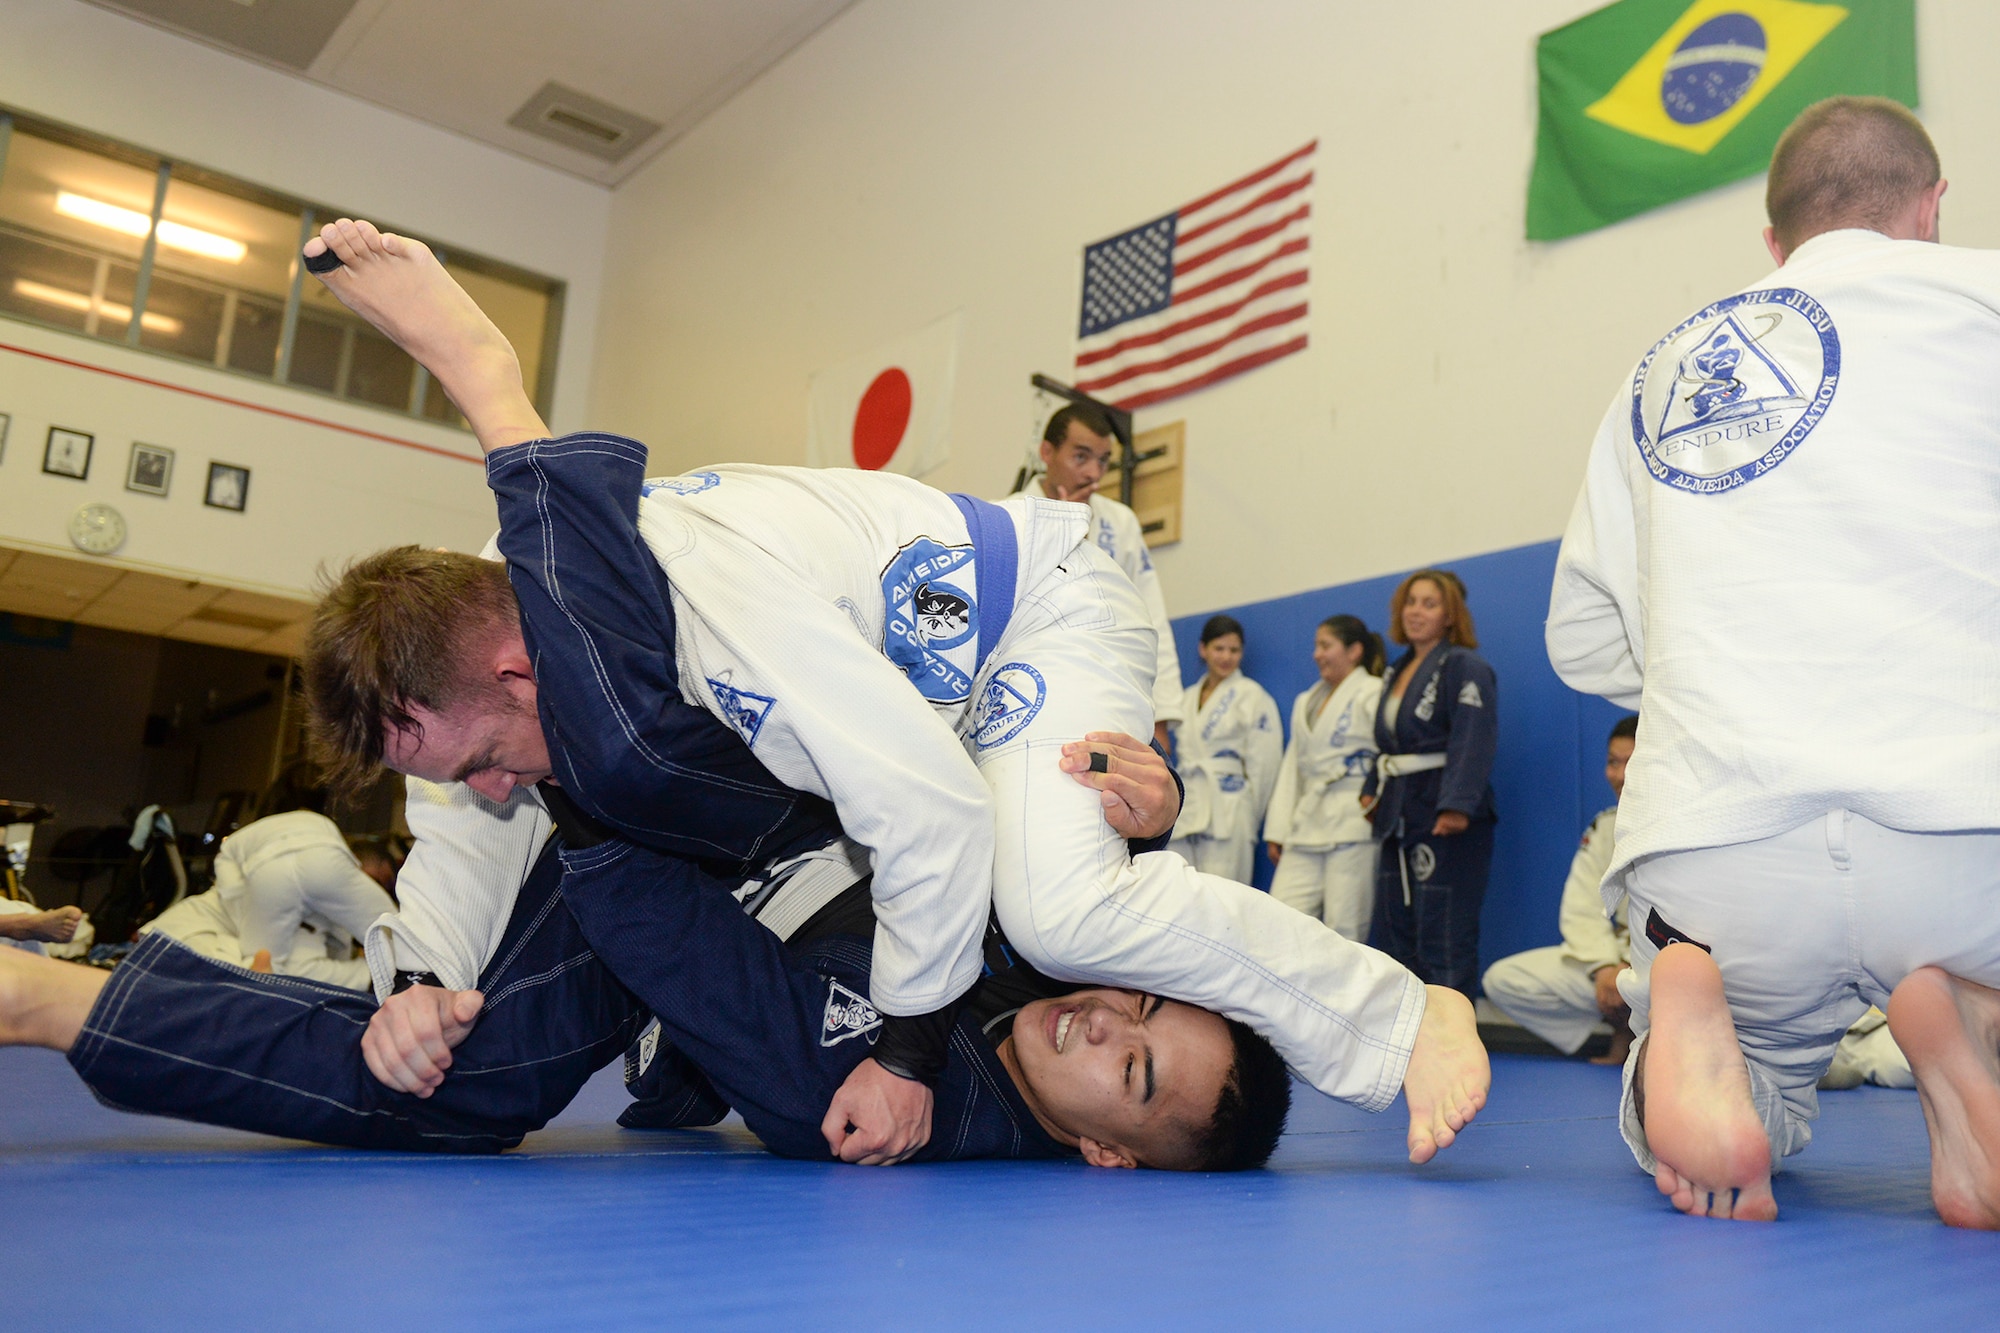 Staff Sgt. Ryan Underwood, 374th Communications Squadro, tries to pass the guard of his opponent, Senior Airman Vonfernan Carios, 374th Aerospace Medicine Squadron, during an jiu-jitsu class sparing session at Yokota Air Base, Japan, June 10, 2015. Sparing helps students improve muscle-memory and build fighting endurance. (U.S. Air Force photos by Airman 1st Class Elizabeth Baker/Released)